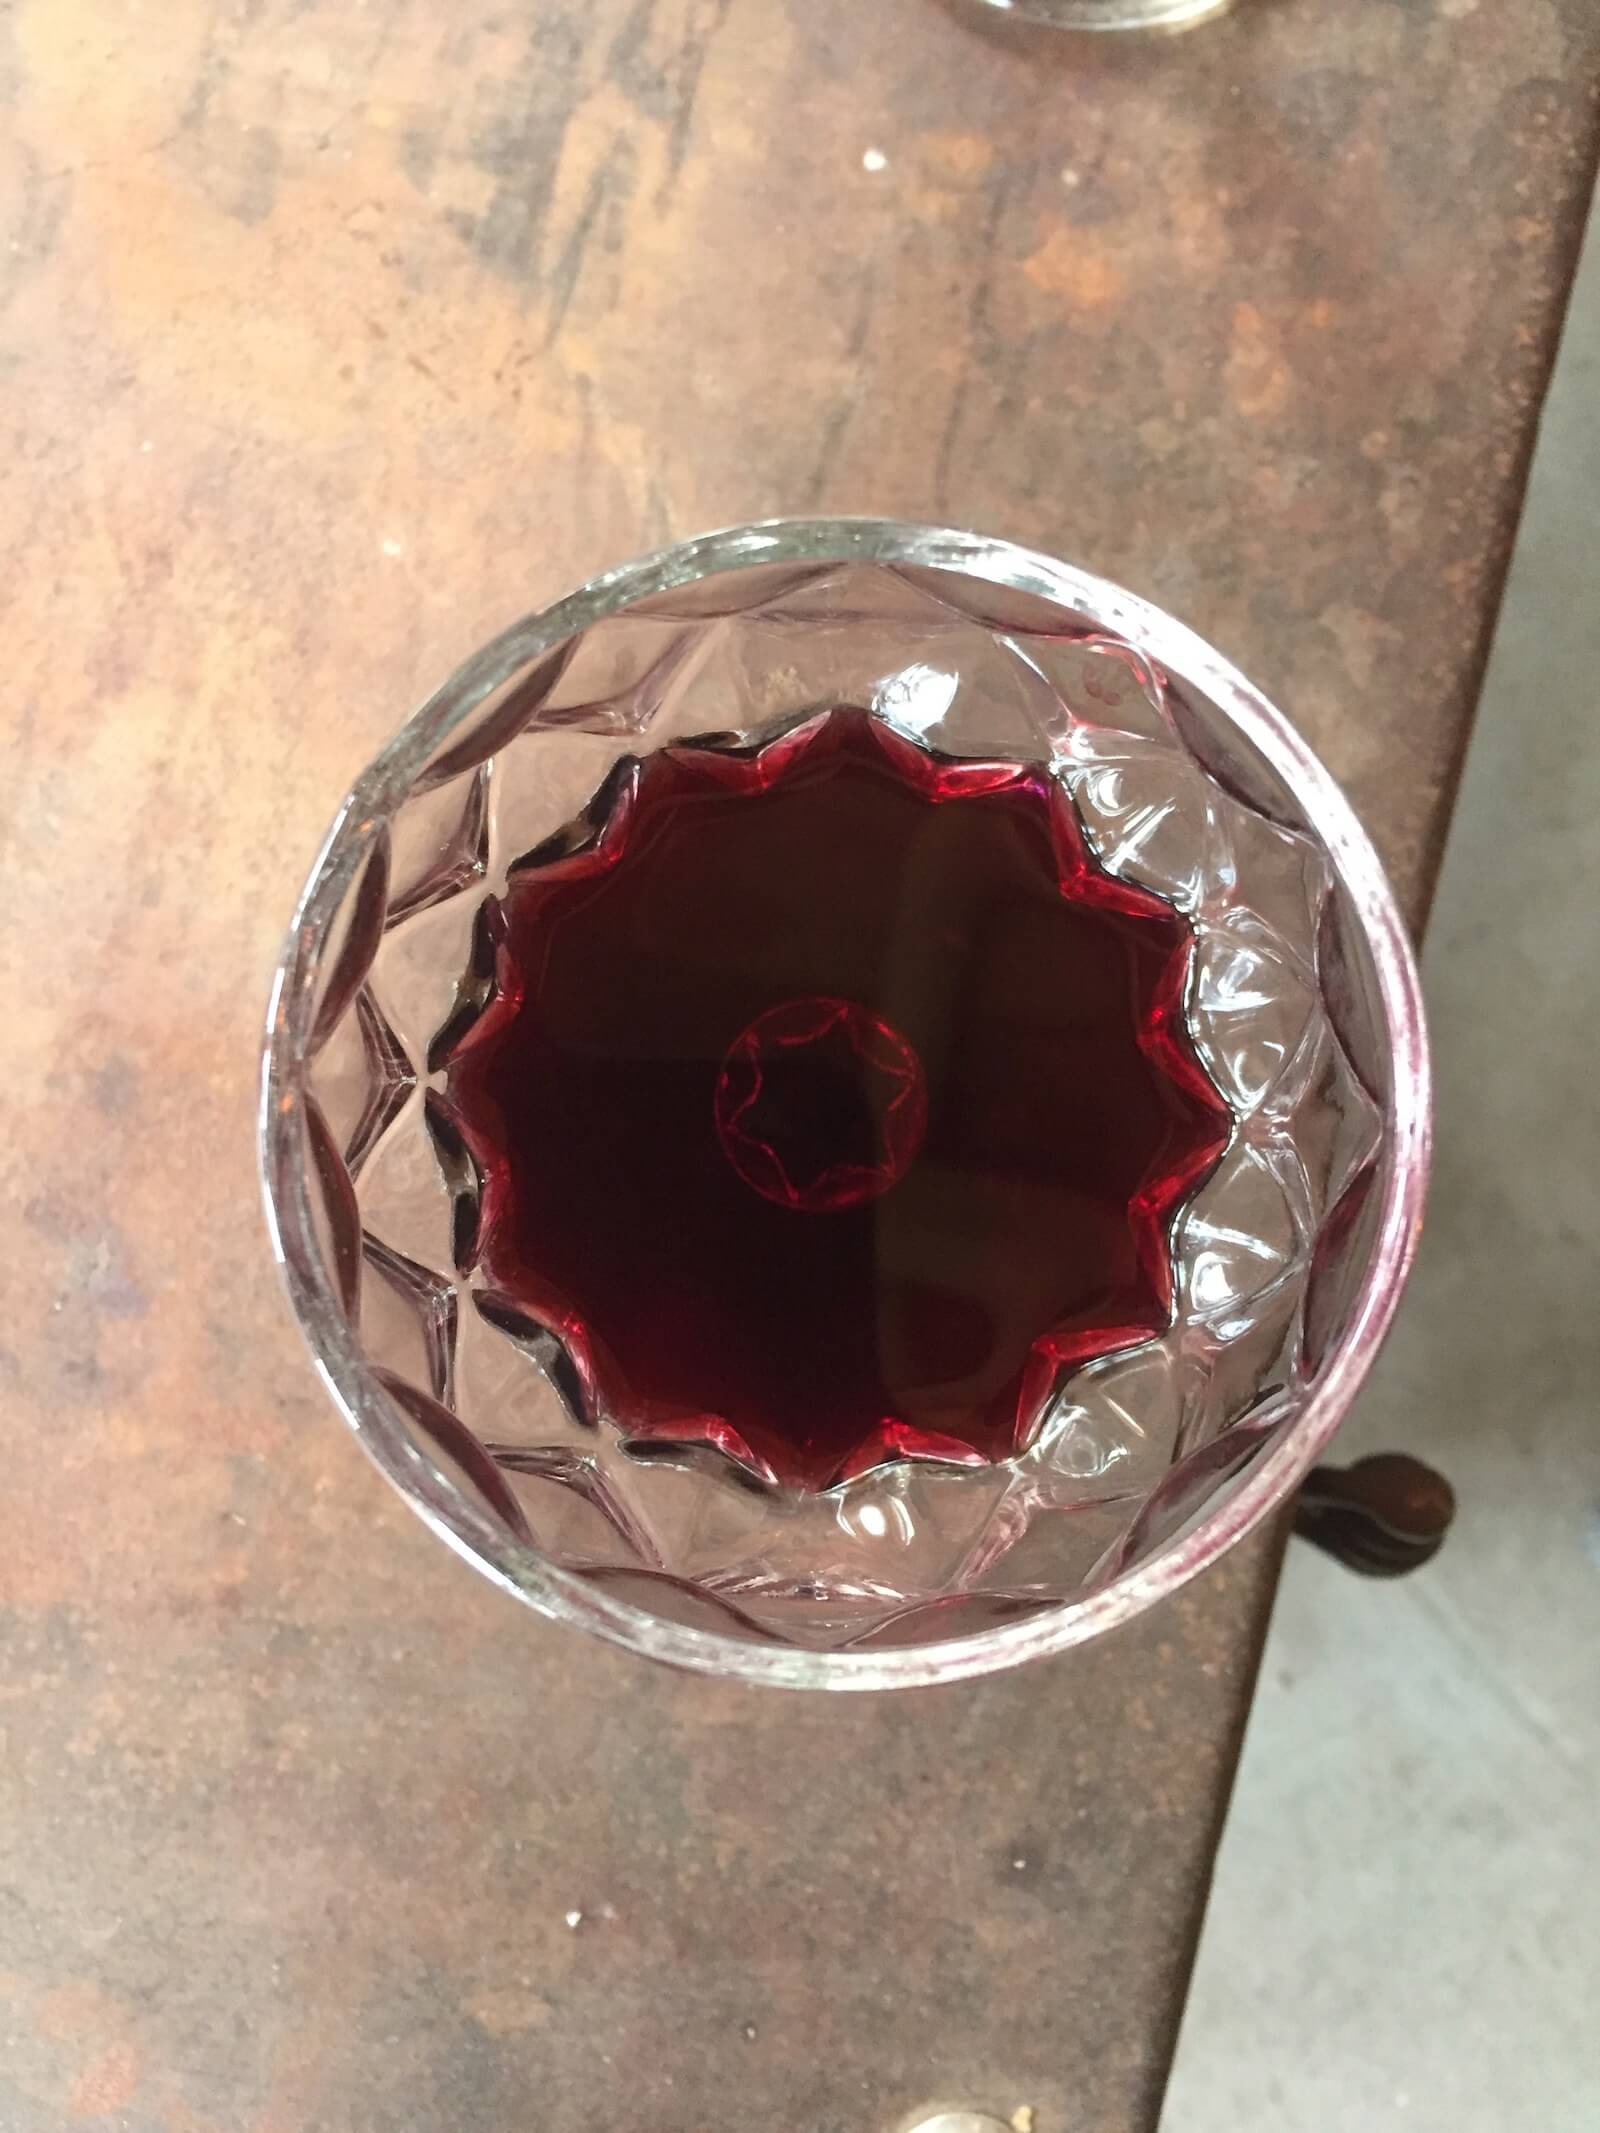 Red wine in crystal glass looking down from above